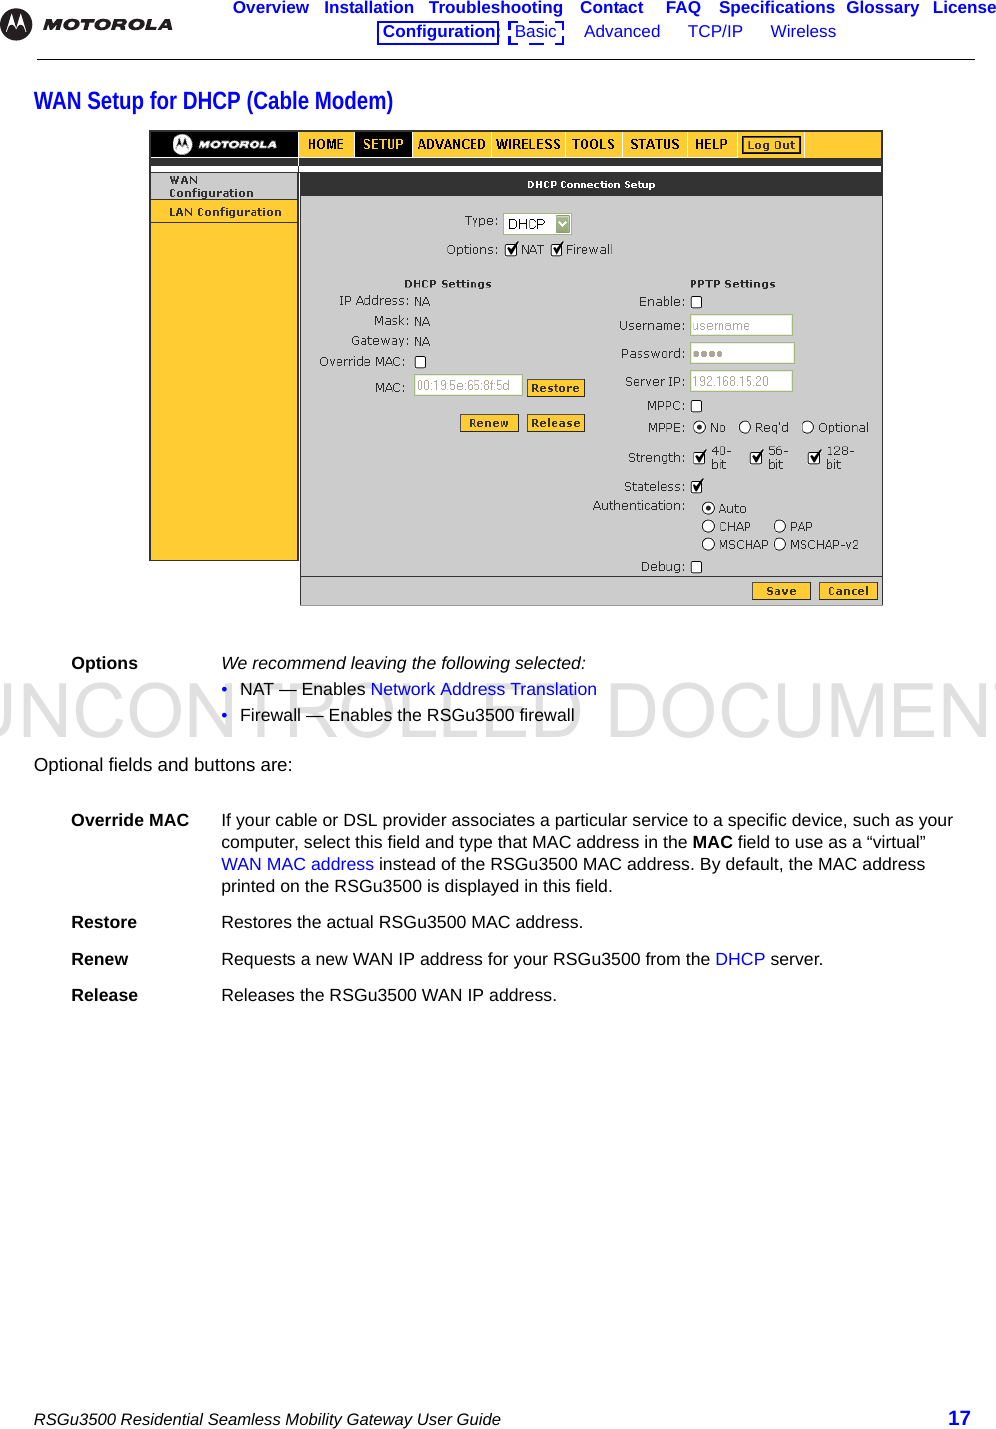 UNCONTROLLED DOCUMENTRSGu3500 Residential Seamless Mobility Gateway User Guide 17Overview Installation Troubleshooting Contact FAQ Specifications Glossary LicenseConfiguration:   Basic      Advanced      TCP/IP      Wireless    WAN Setup for DHCP (Cable Modem)Optional fields and buttons are:Options We recommend leaving the following selected:•NAT — Enables Network Address Translation•Firewall — Enables the RSGu3500 firewallOverride MAC If your cable or DSL provider associates a particular service to a specific device, such as your computer, select this field and type that MAC address in the MAC field to use as a “virtual” WAN MAC address instead of the RSGu3500 MAC address. By default, the MAC address printed on the RSGu3500 is displayed in this field.Restore Restores the actual RSGu3500 MAC address.Renew Requests a new WAN IP address for your RSGu3500 from the DHCP server. Release Releases the RSGu3500 WAN IP address.